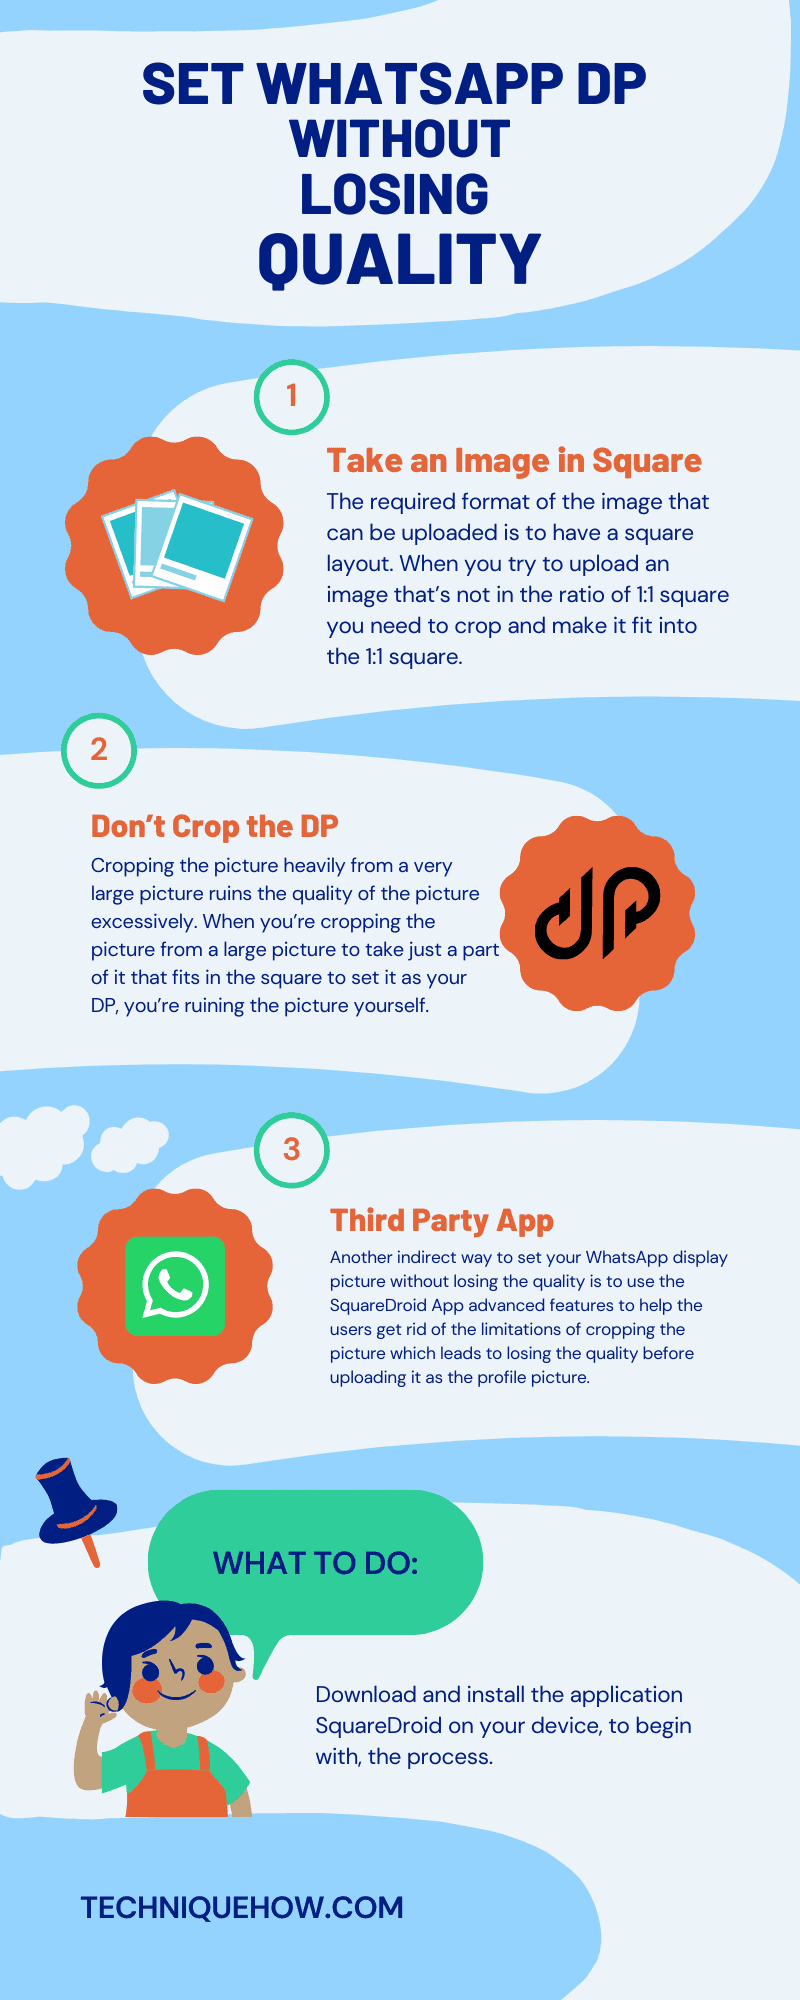 Infographic_Set WhatsApp DP without Losing Quality